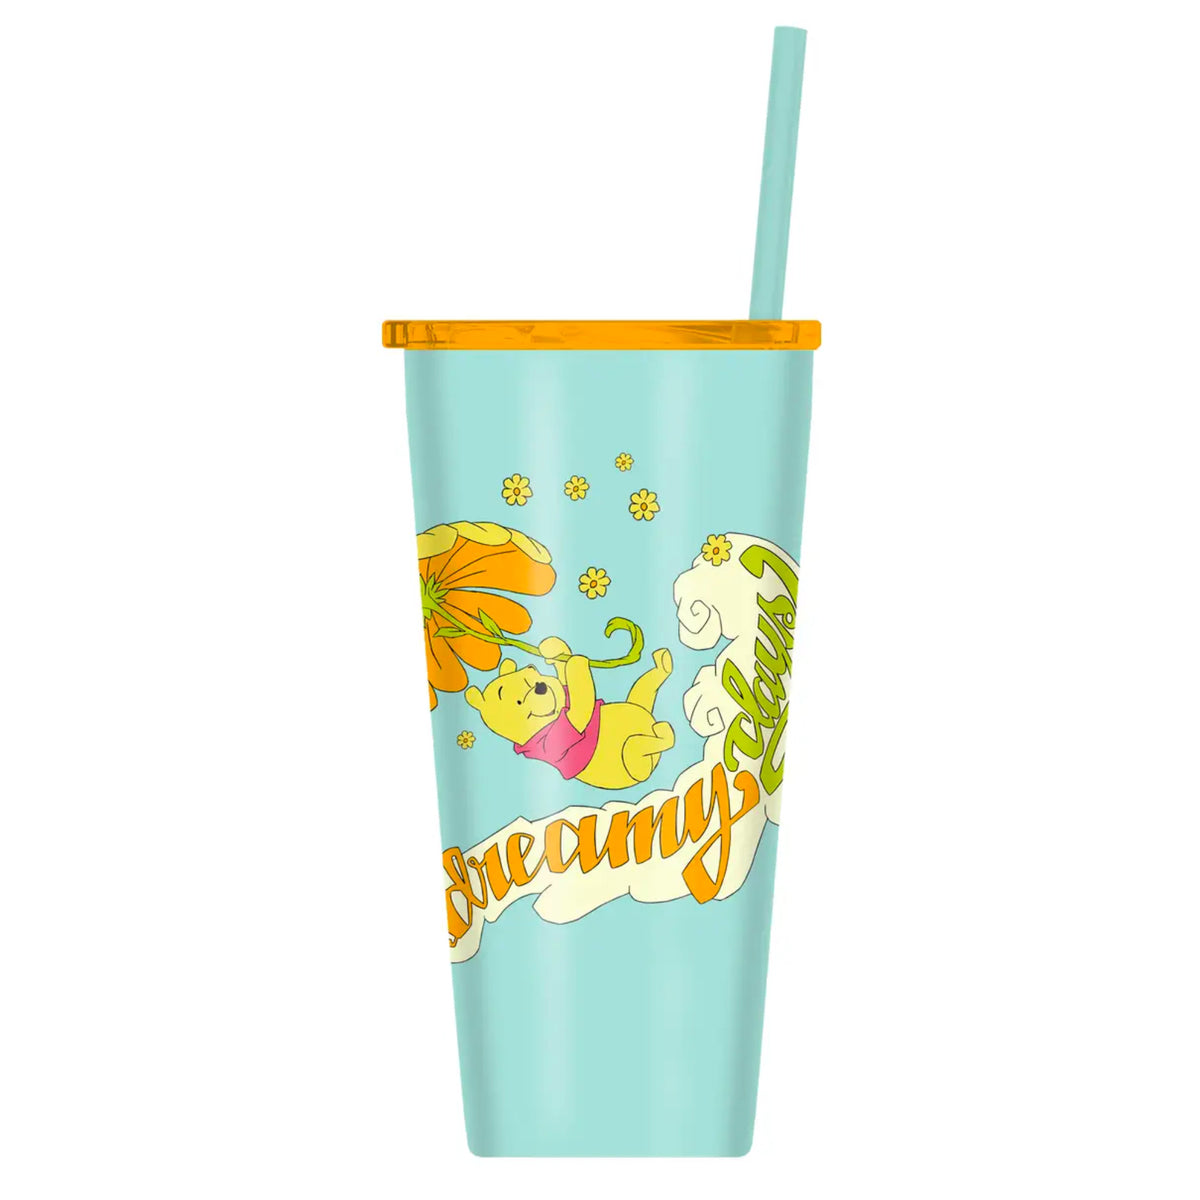 Pooh 22oz Double Walled Stainless Steel Tumbler w/ Straw